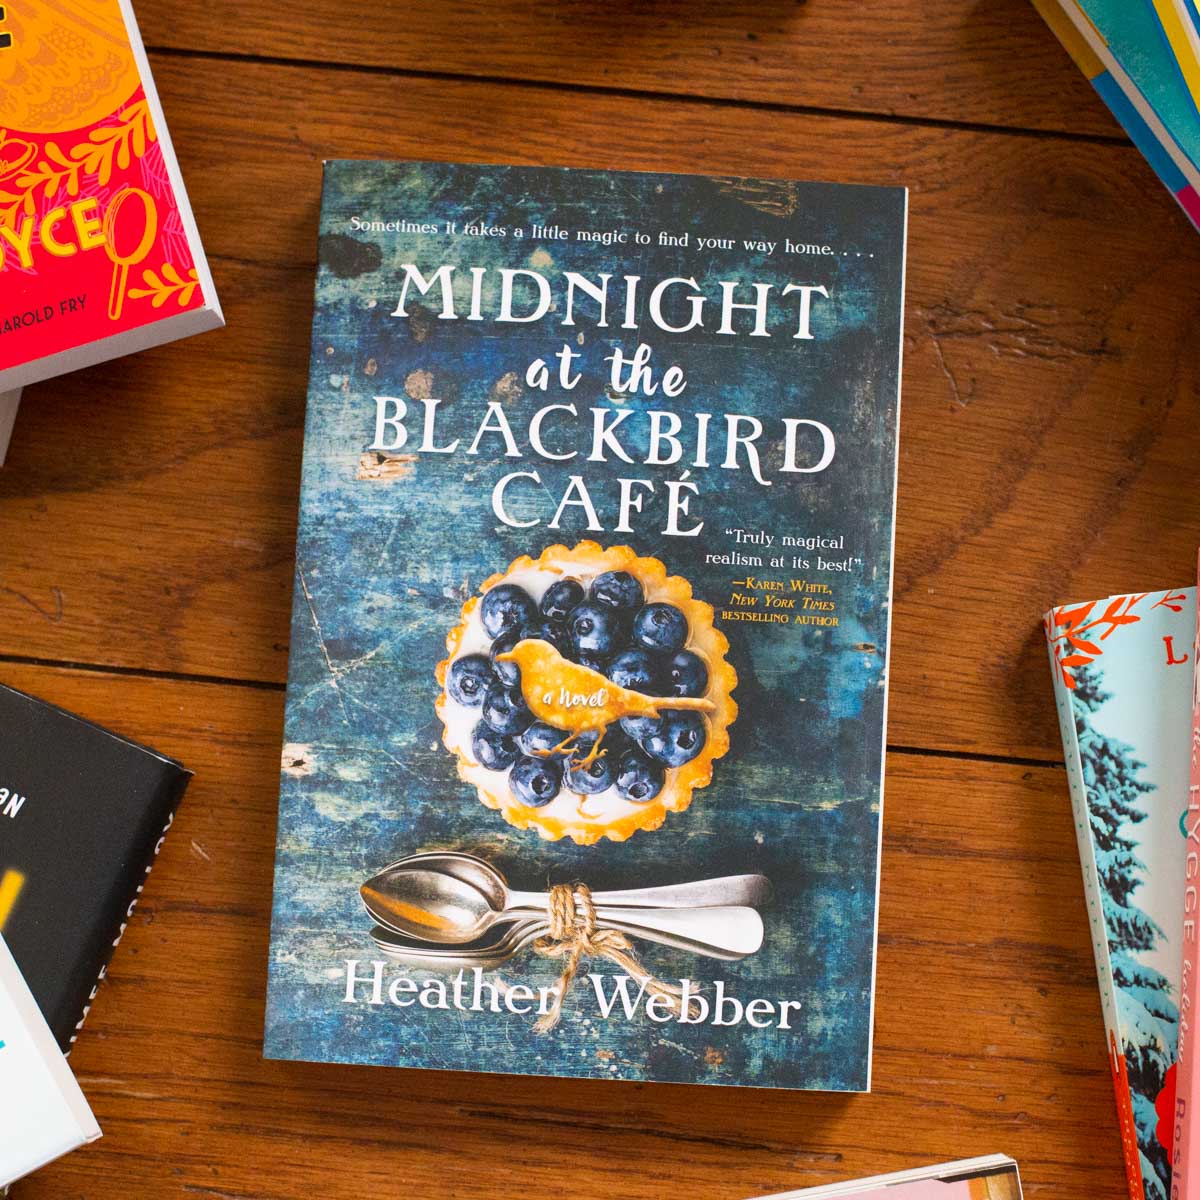 A copy of the book Midnight at the Blackbird Cafe is on the table.